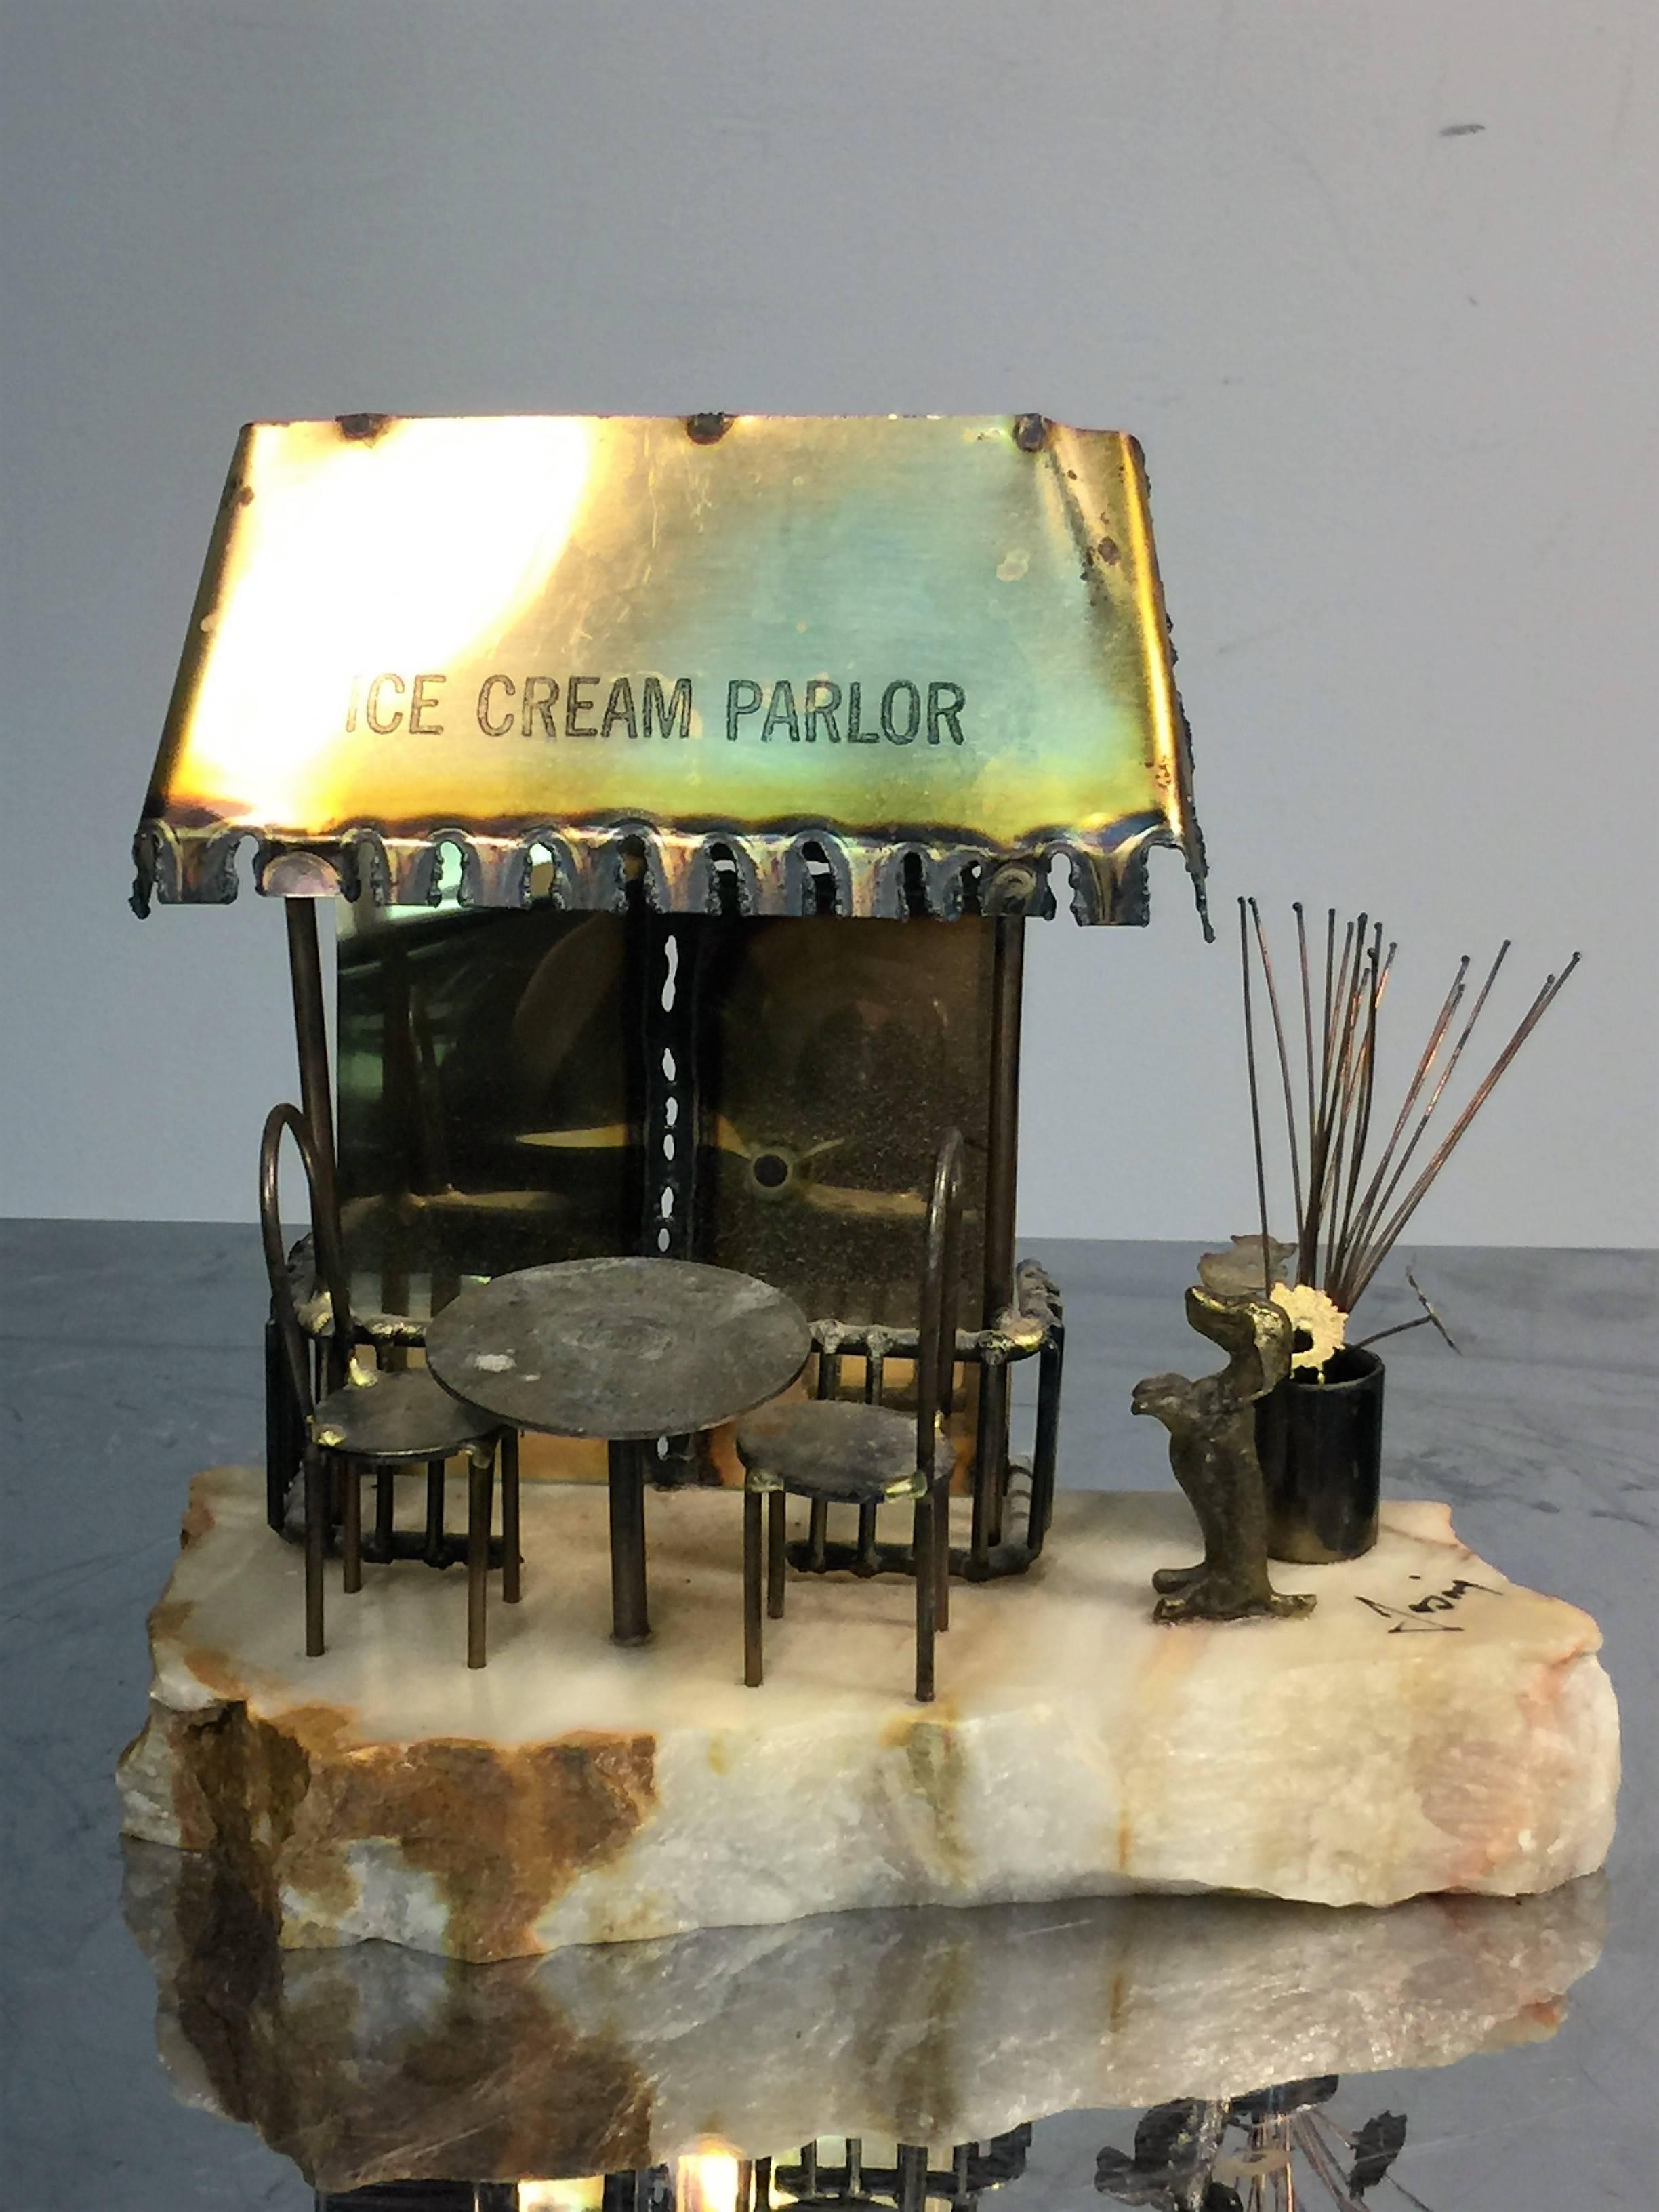 Adorable 1970s mixed metals ice cream parlor with begging dog, cafe table and chairs and plant in pot. Signed in black script jasing.